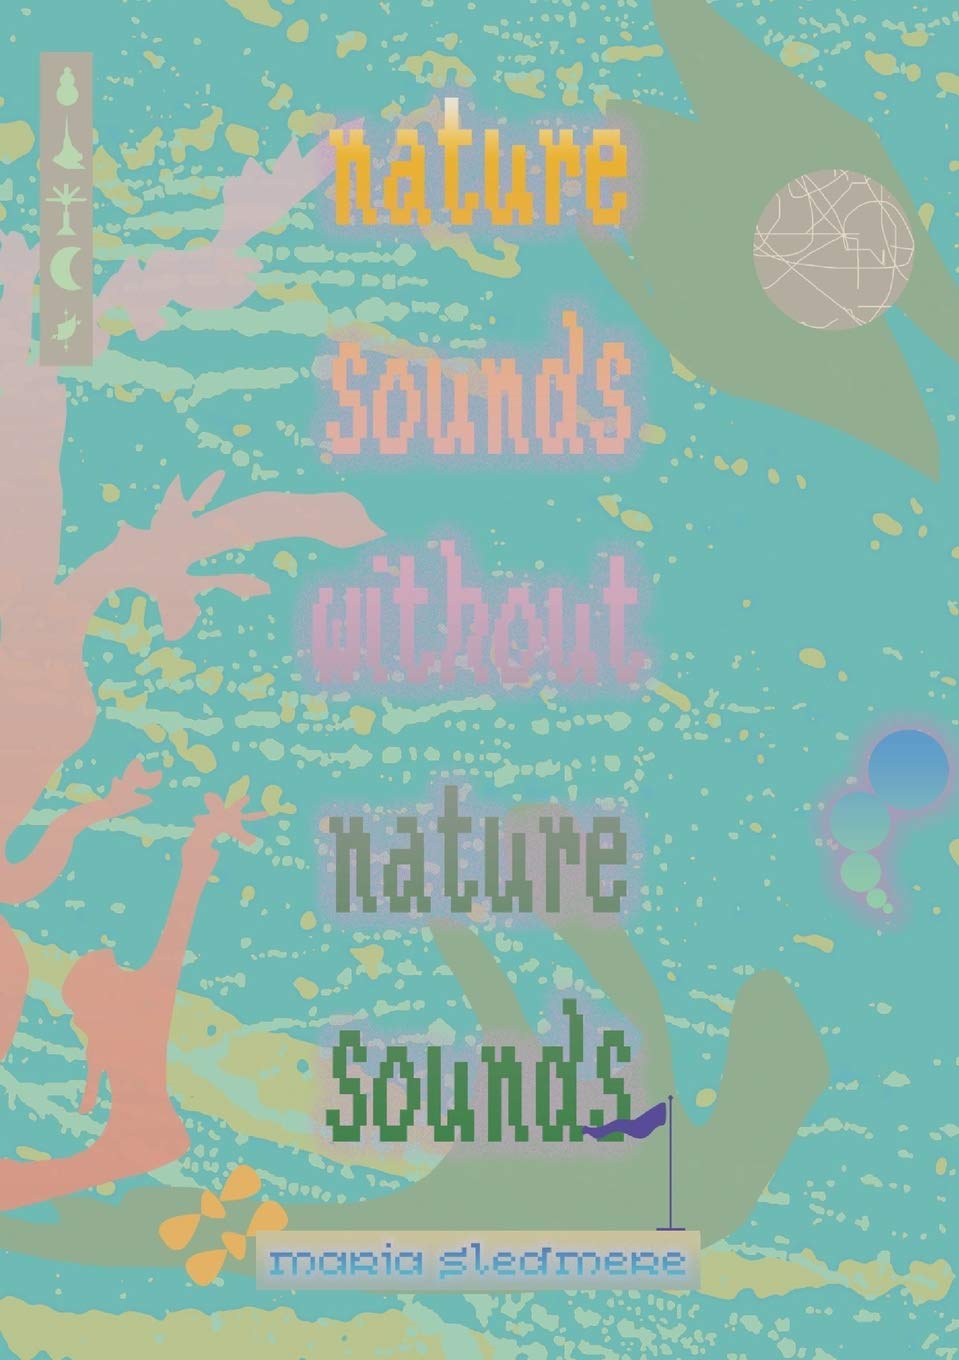 Maria Sledmere – nature sounds without nature sounds